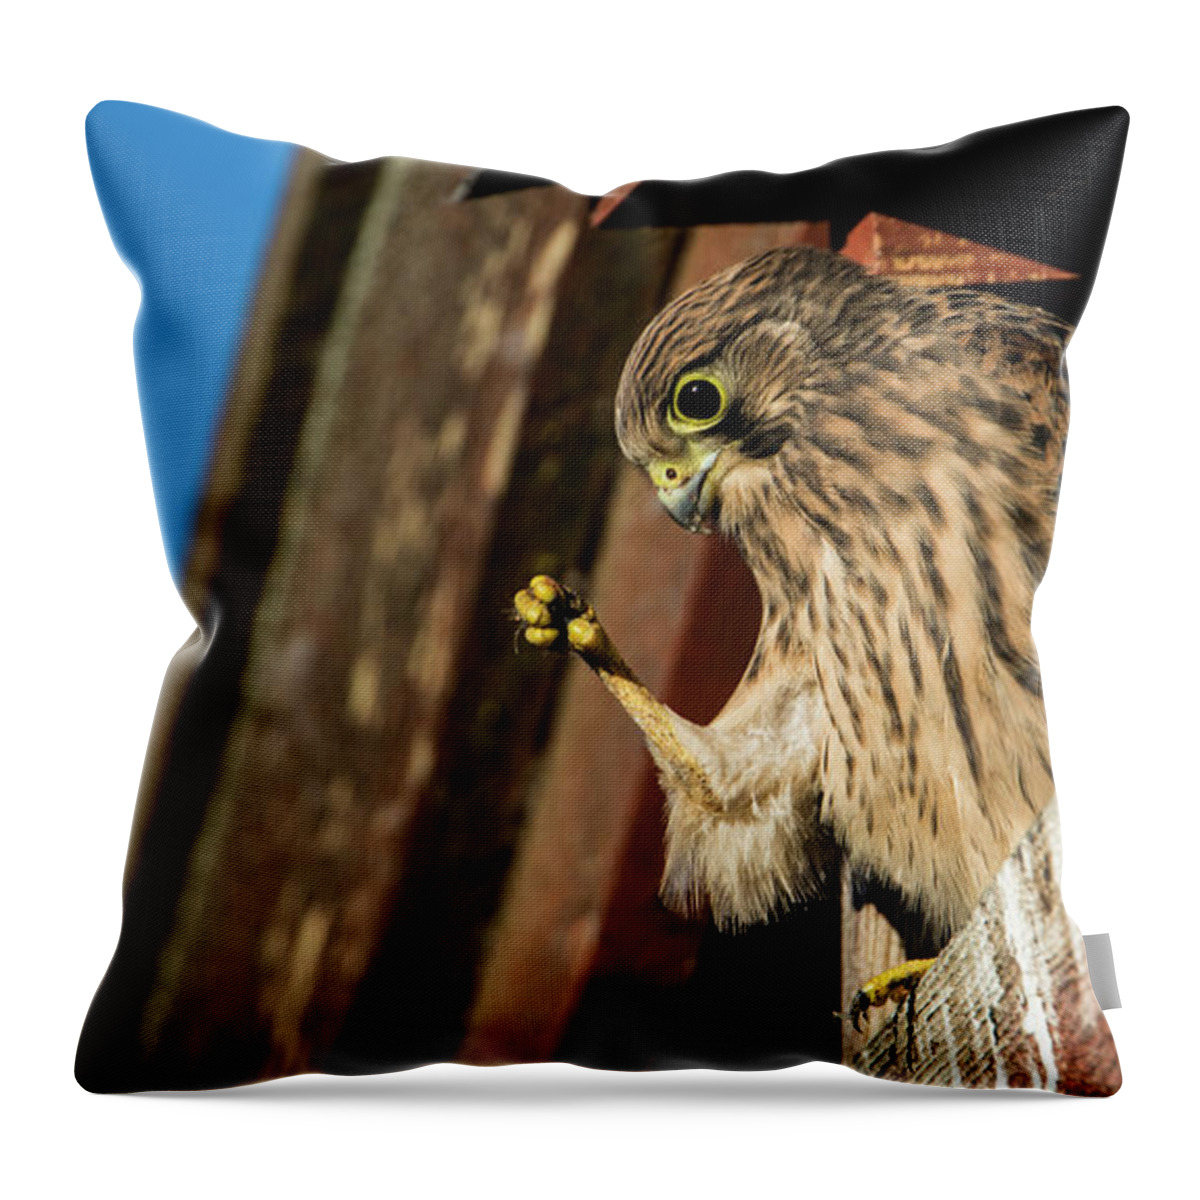 Look Throw Pillow featuring the photograph Look by Torbjorn Swenelius